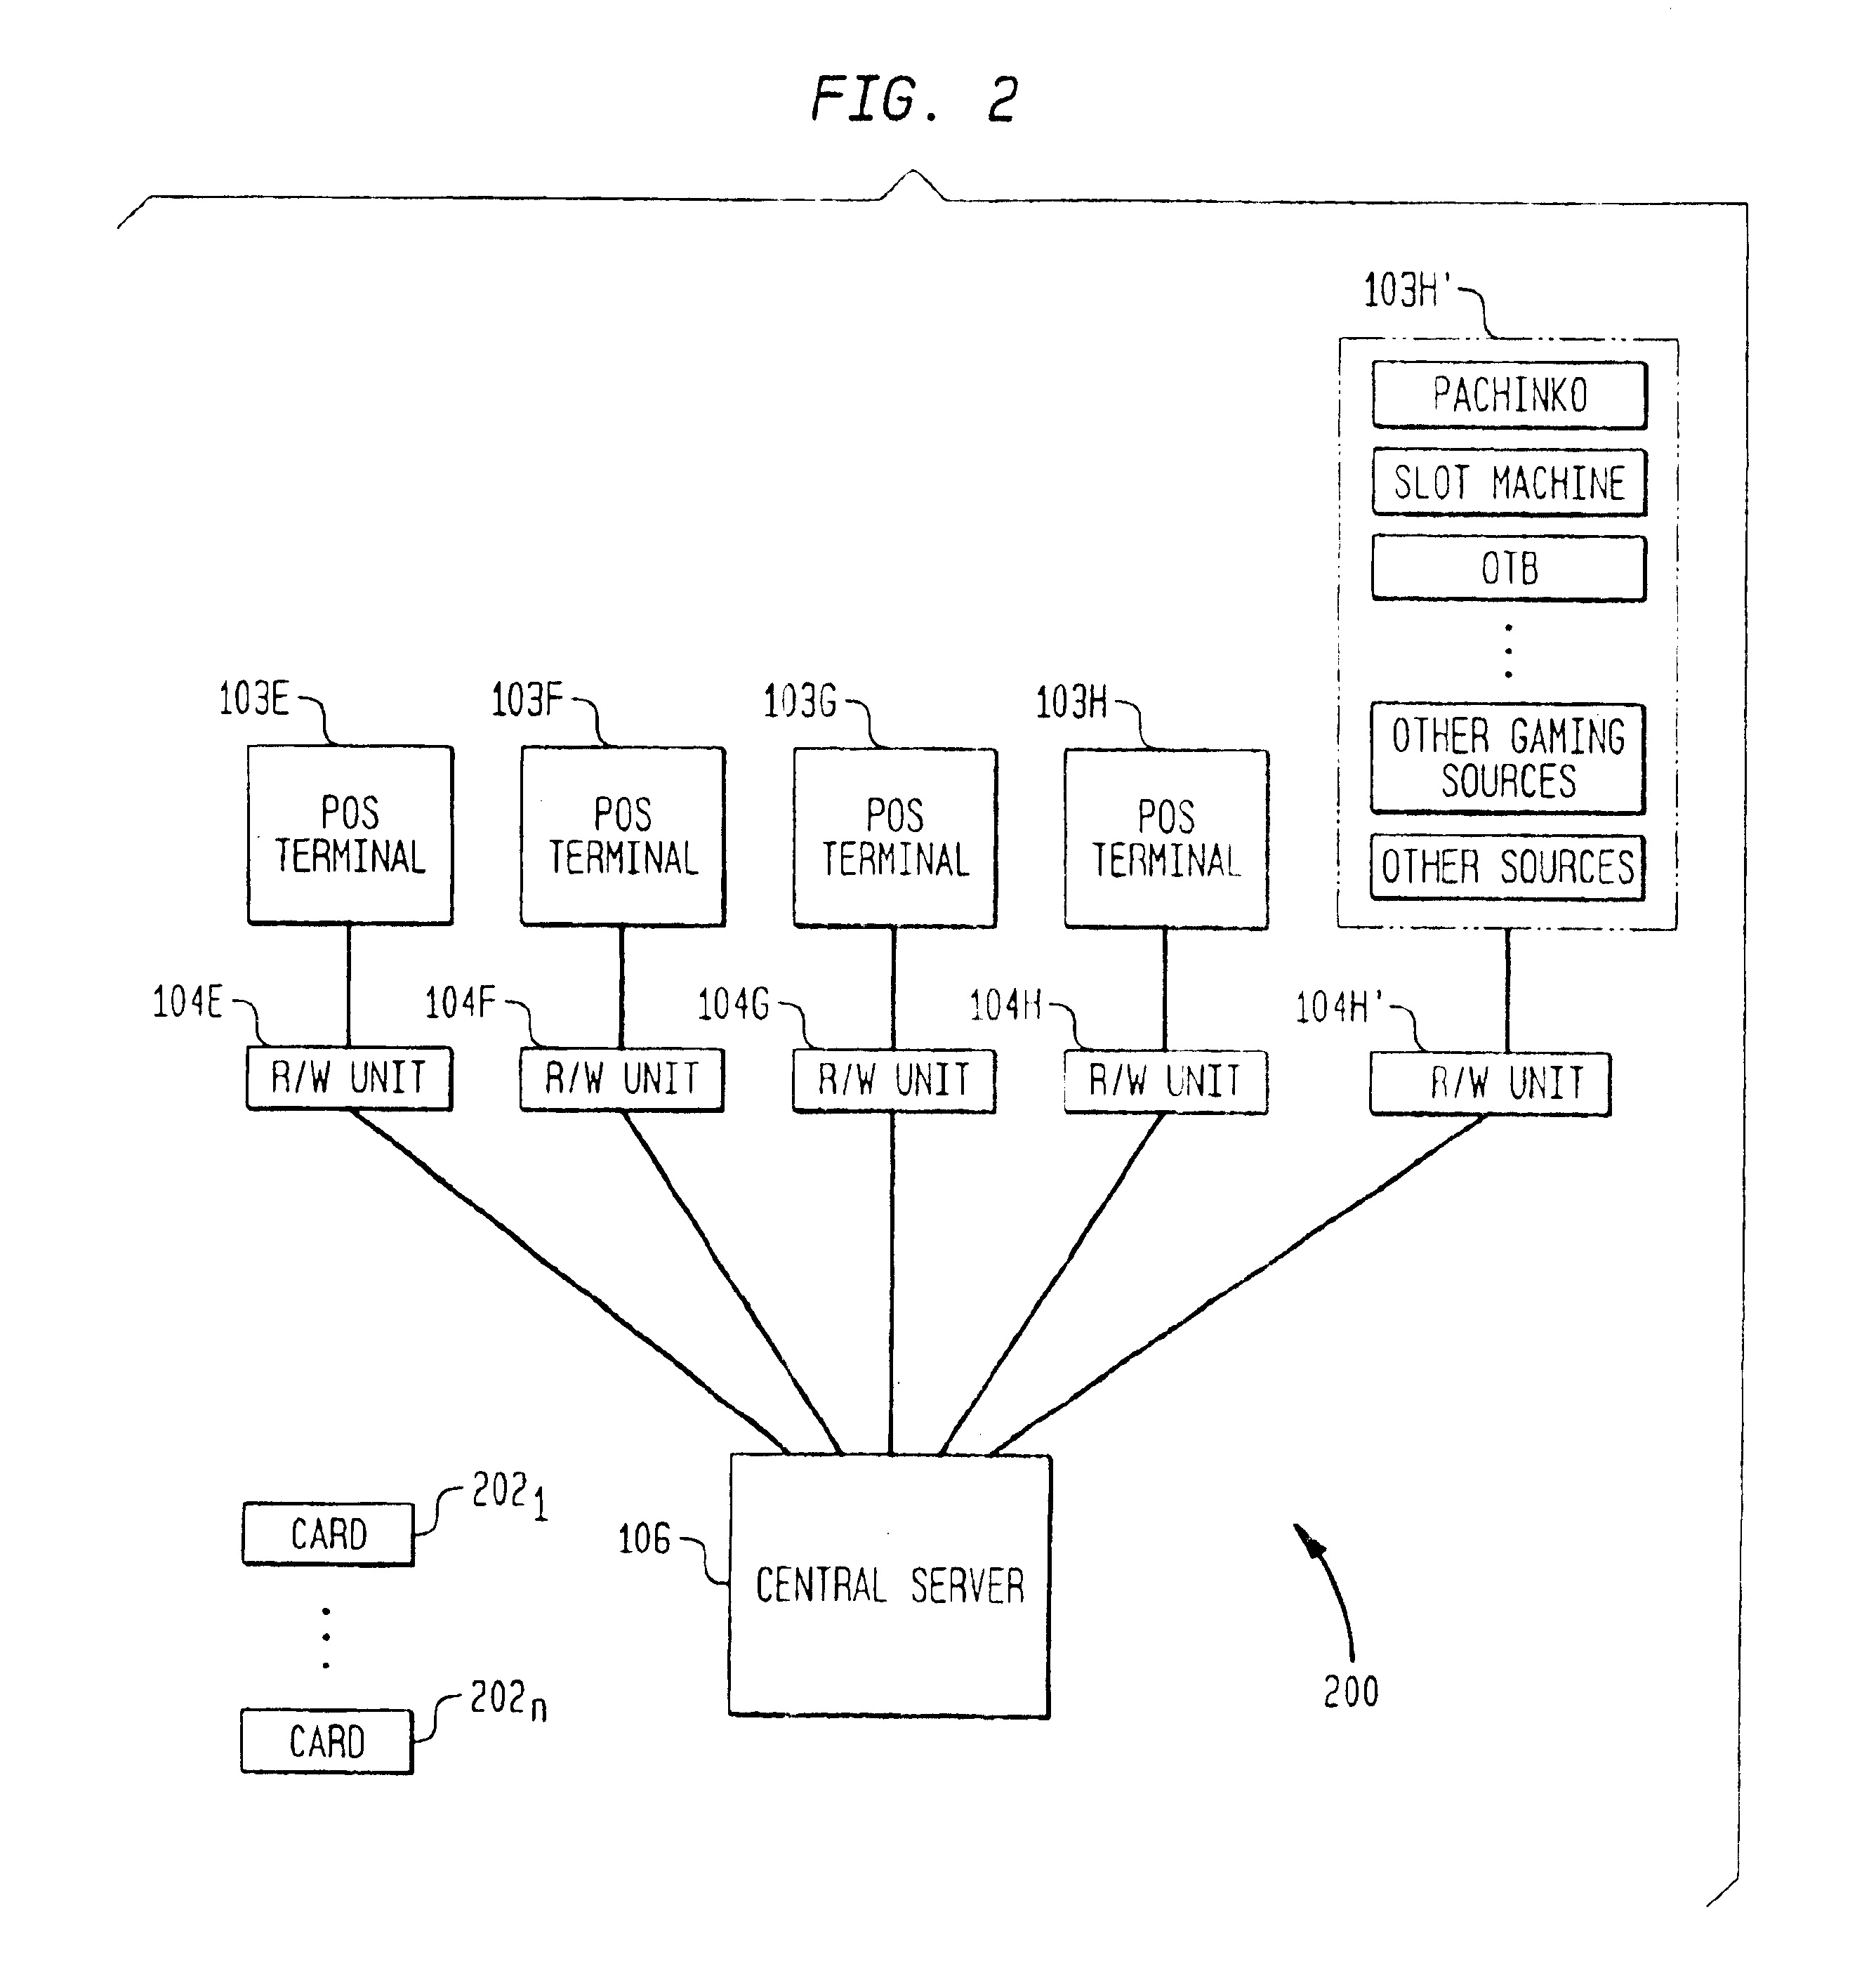 Methods and apparatus for electronically storing and retrieving value information on a portable card